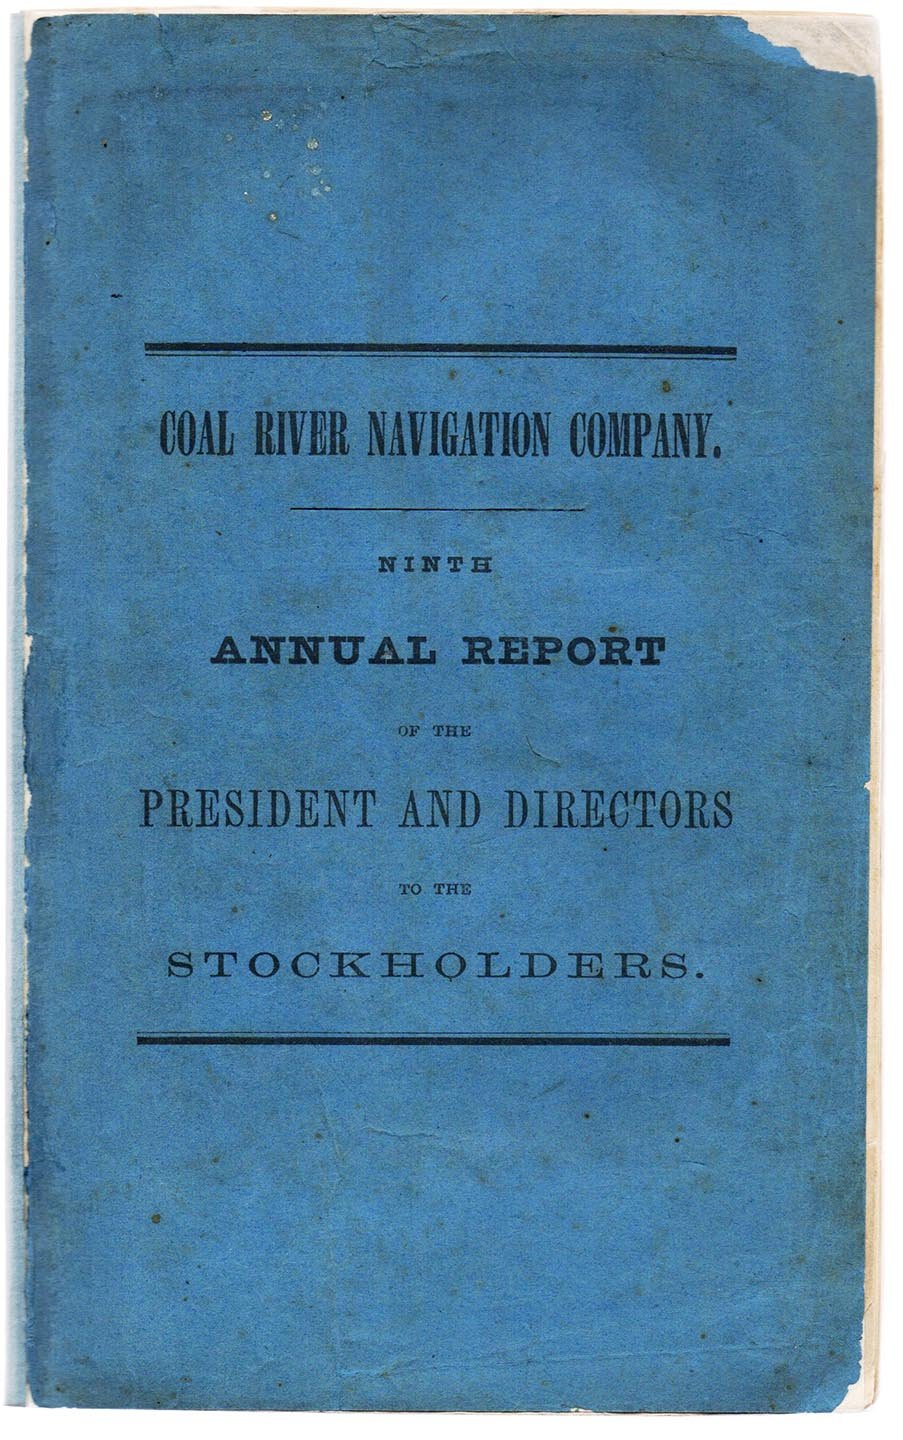 Ninth Annual Report of The President and Directors to the Stockholders of the Coal River Navigation Company